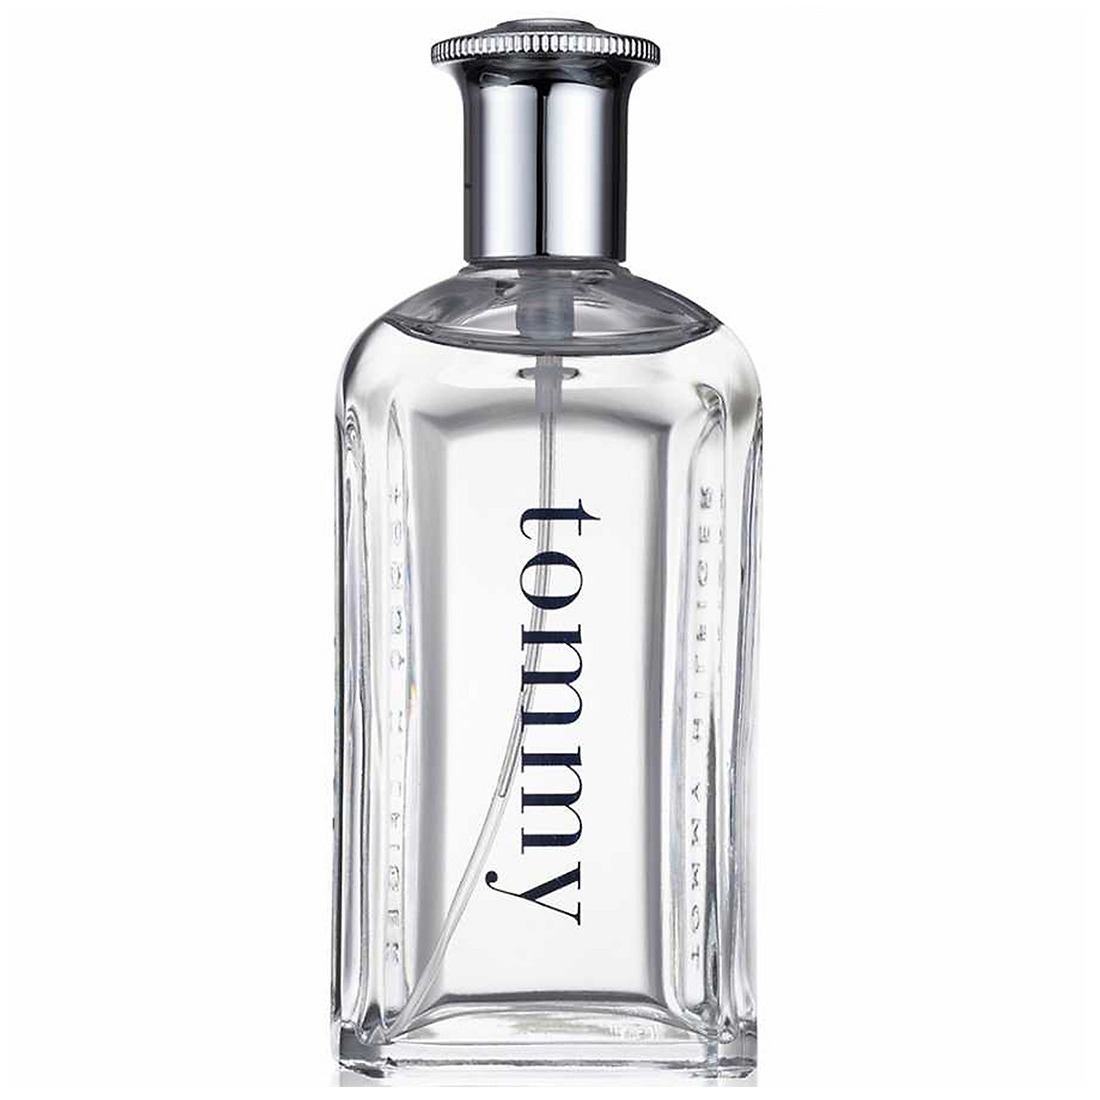 Tommy Hilfiger Tommy Edt 30ml